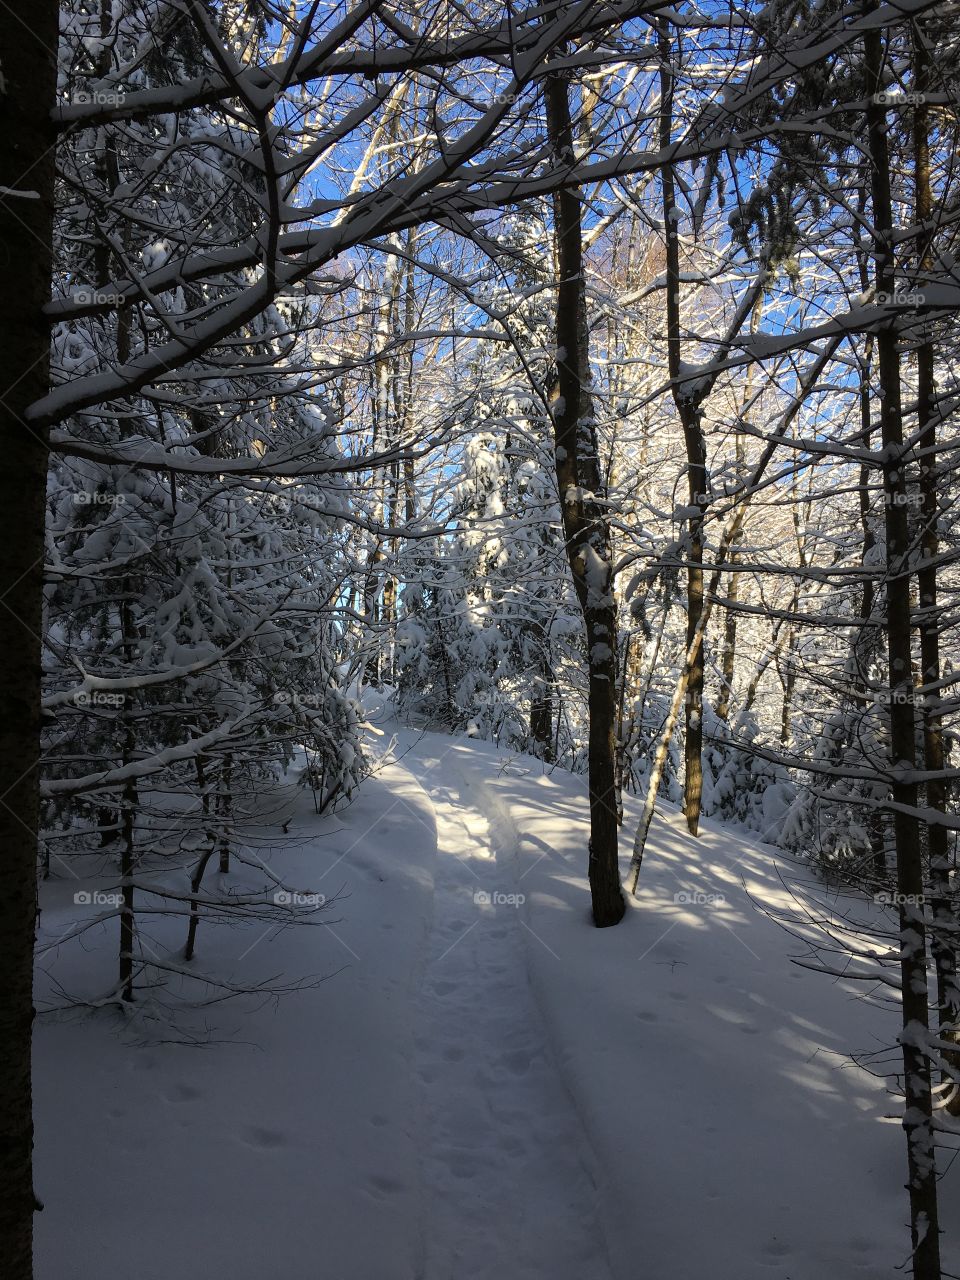 snowshoe trail in the northern ontario wilderness 